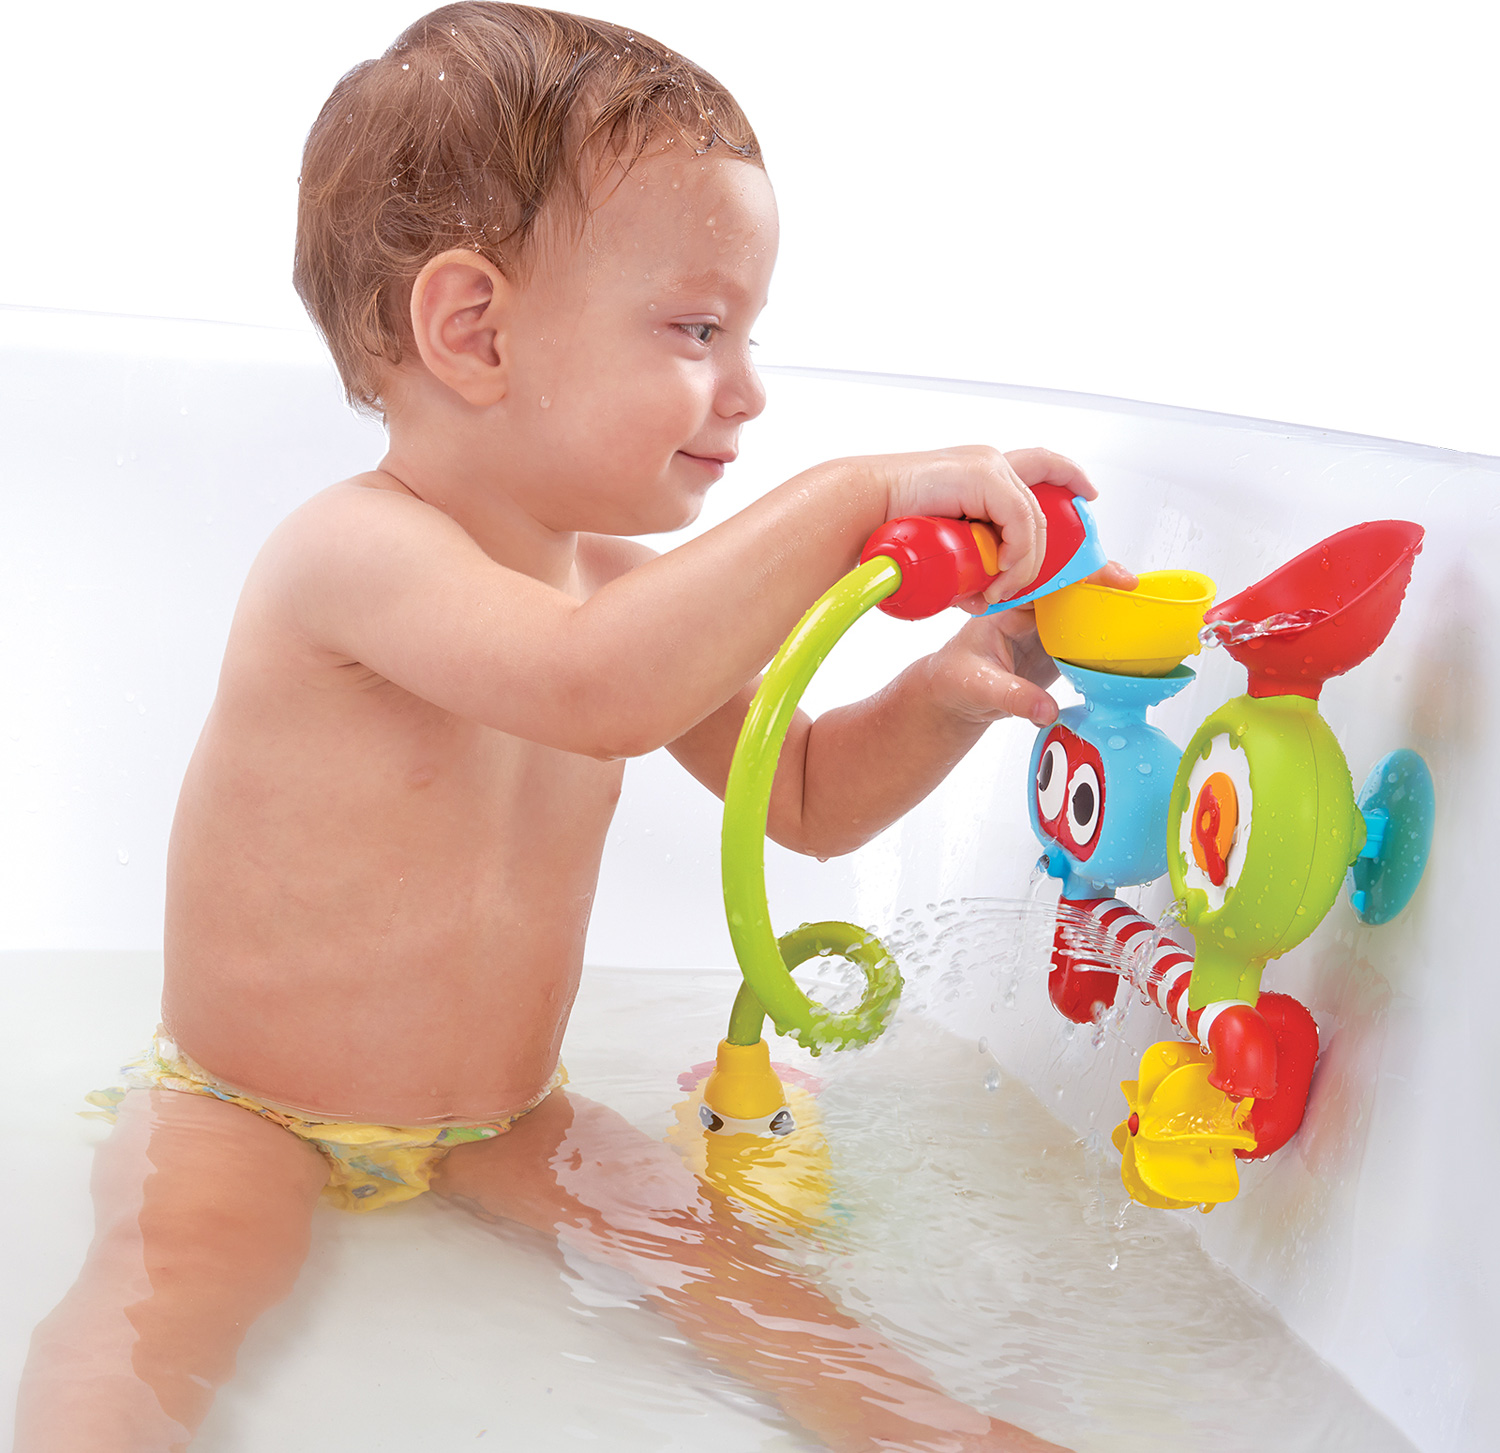 LANHYER Kids Bath Shower Head Battery Operated Water Pump with Hand Shower for Bath time Play.Happy Kids Bath Toy.Great Gift for 1 2 3 4 5 Years Old 